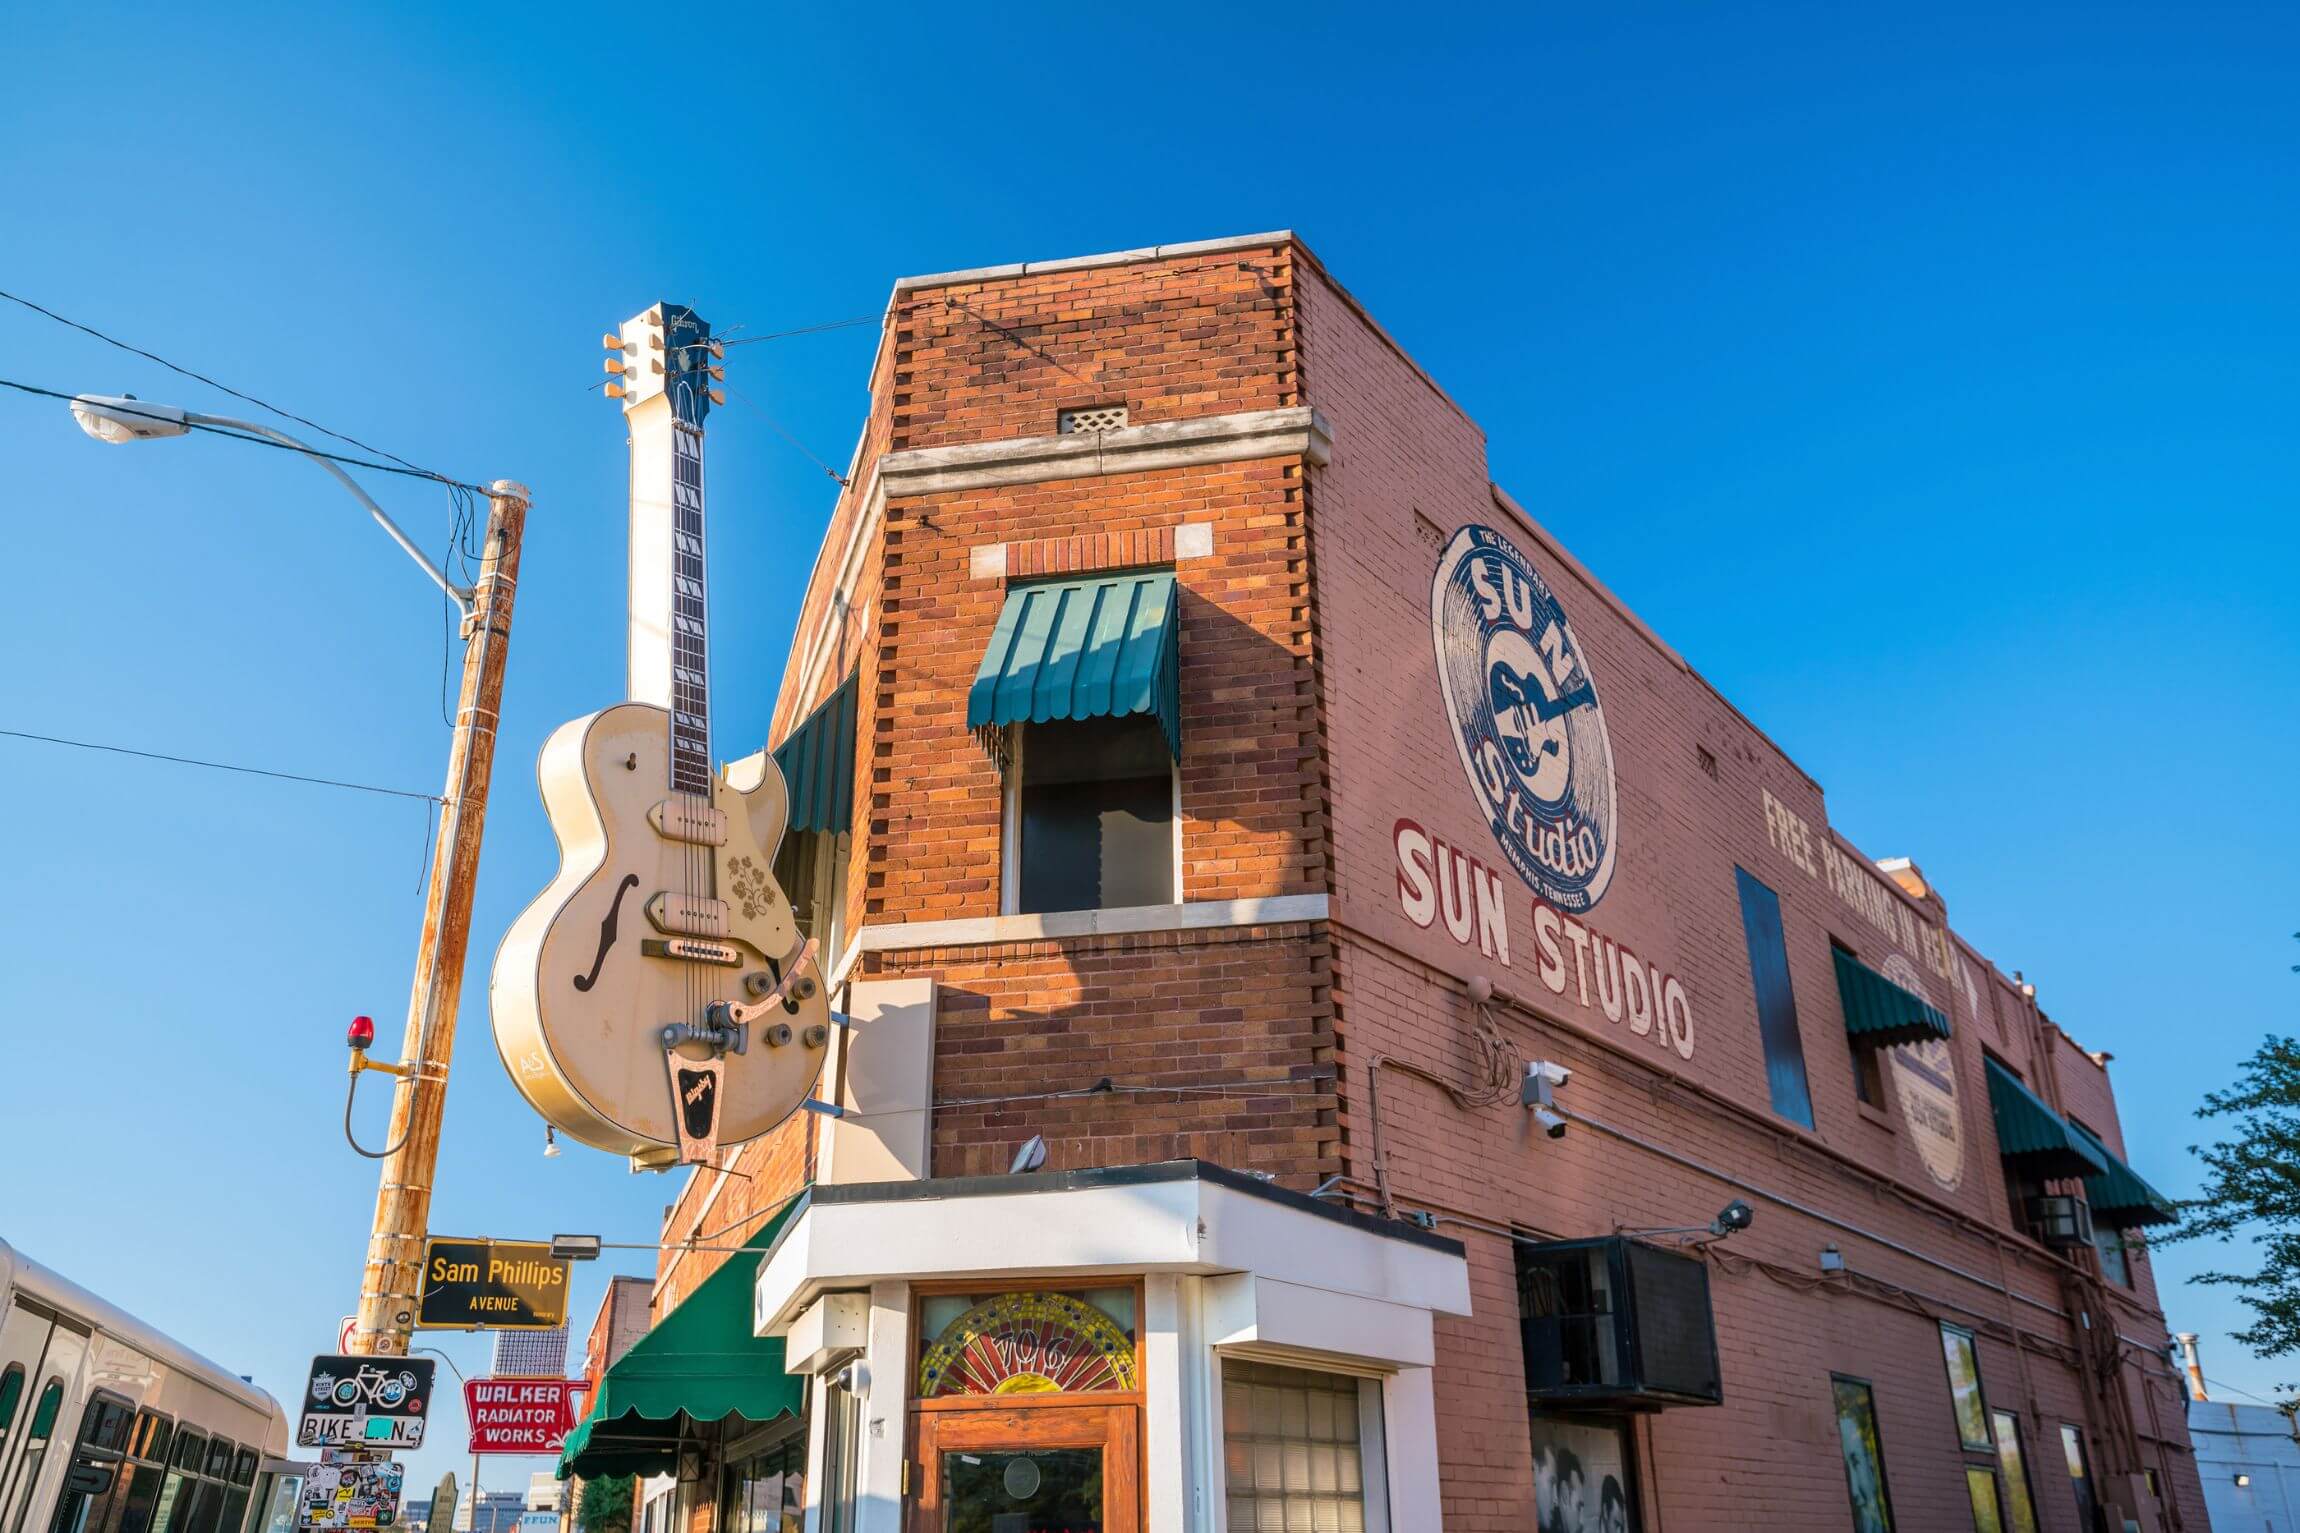 Sun studio things to do in Memphis music USA escorted tour JWT Travel